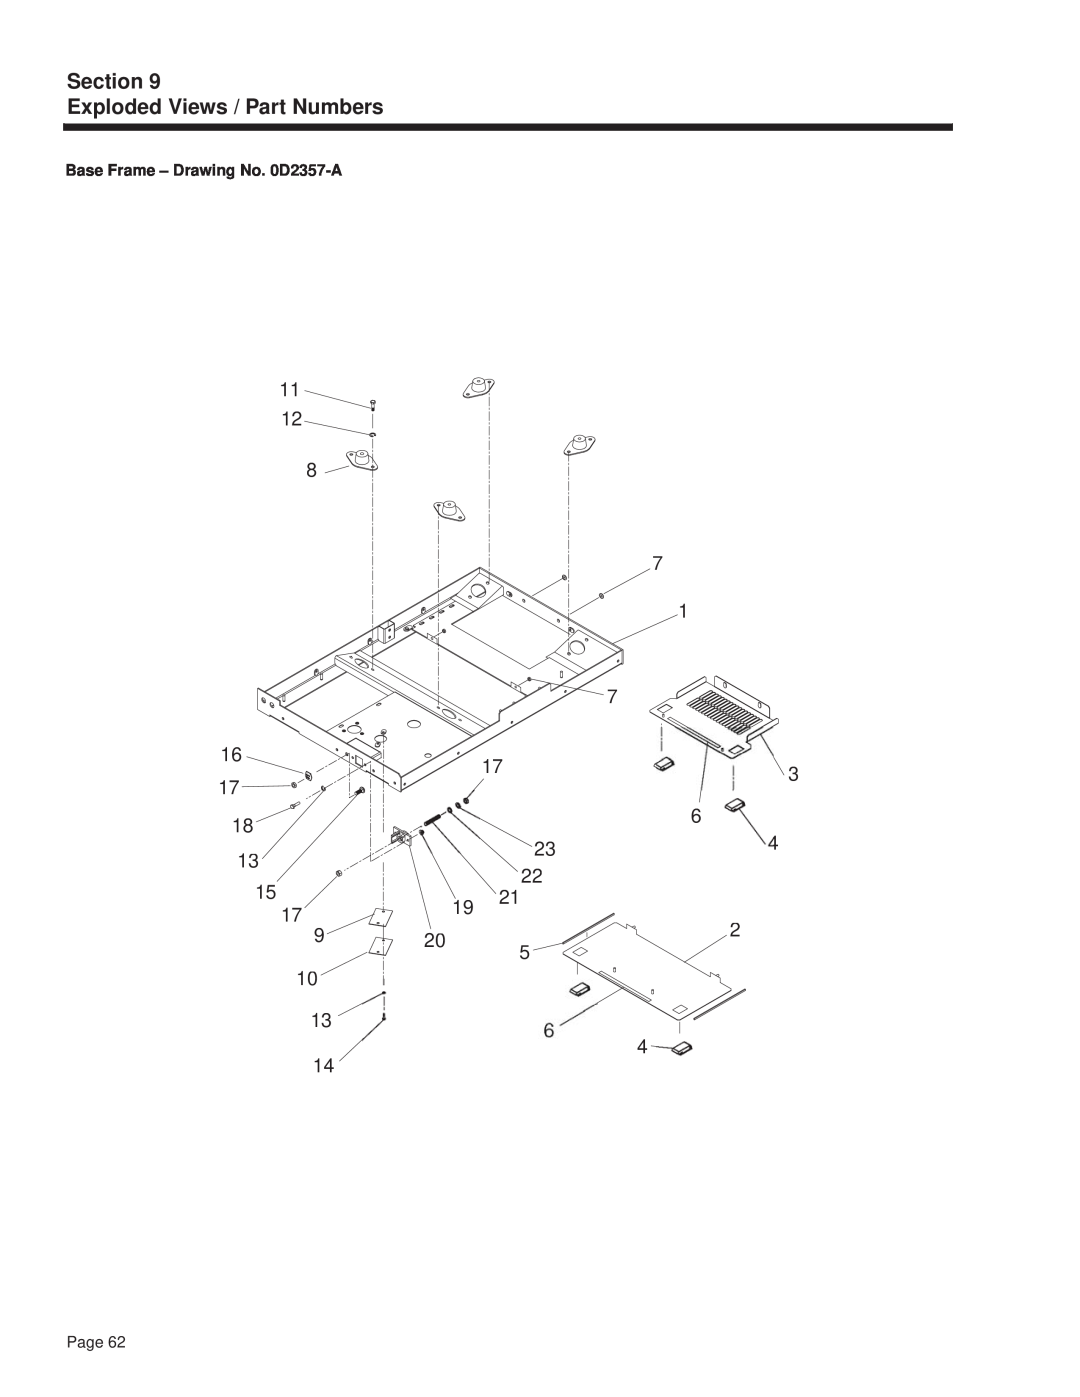 Guardian Technologies 4270 manual Section Exploded Views / Part Numbers, Base Frame - Drawing No. 0D2357-A, Page 